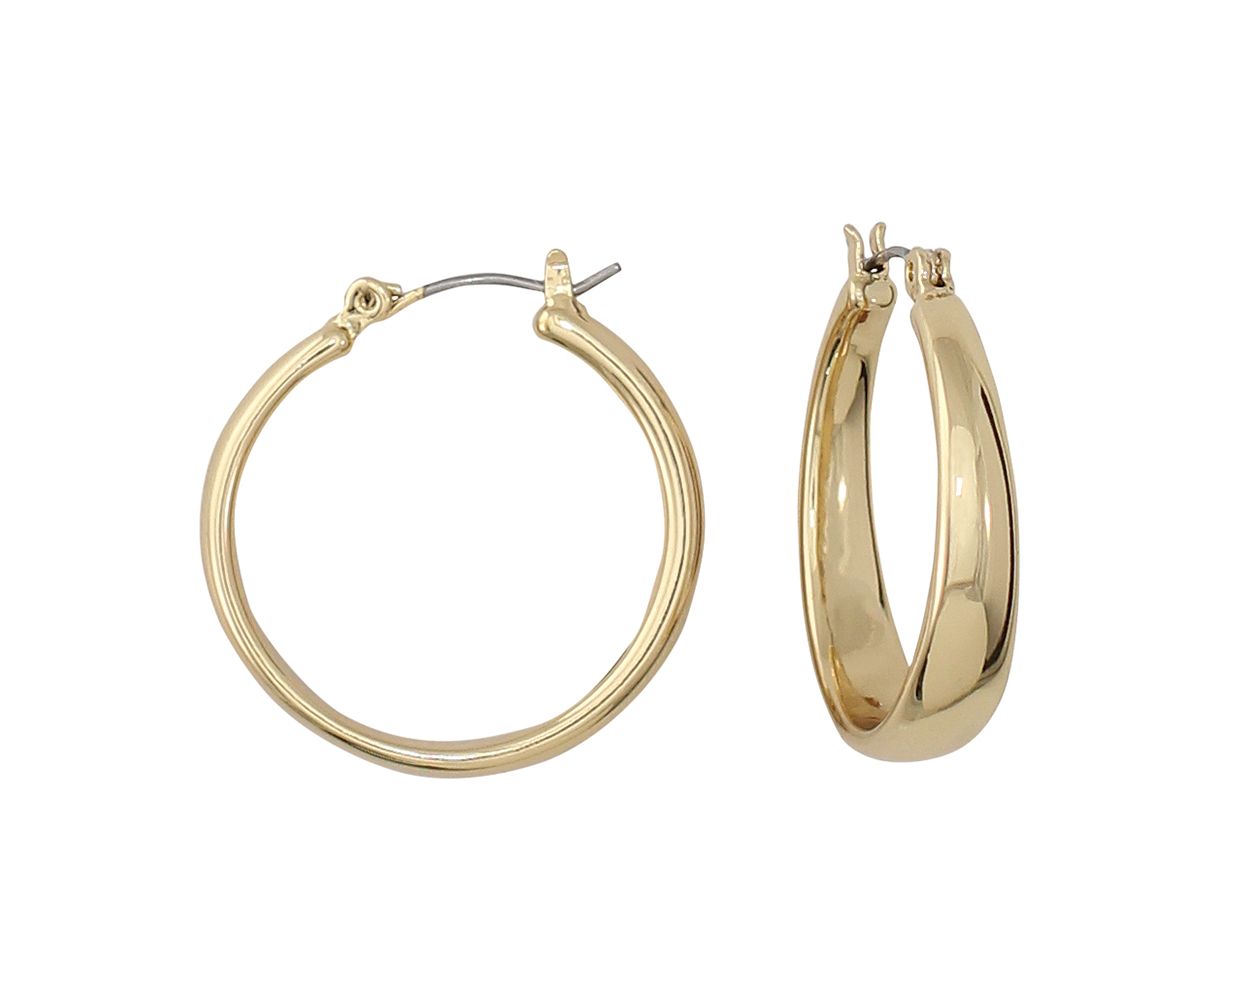 Periwinkle Bright Gold Hoops